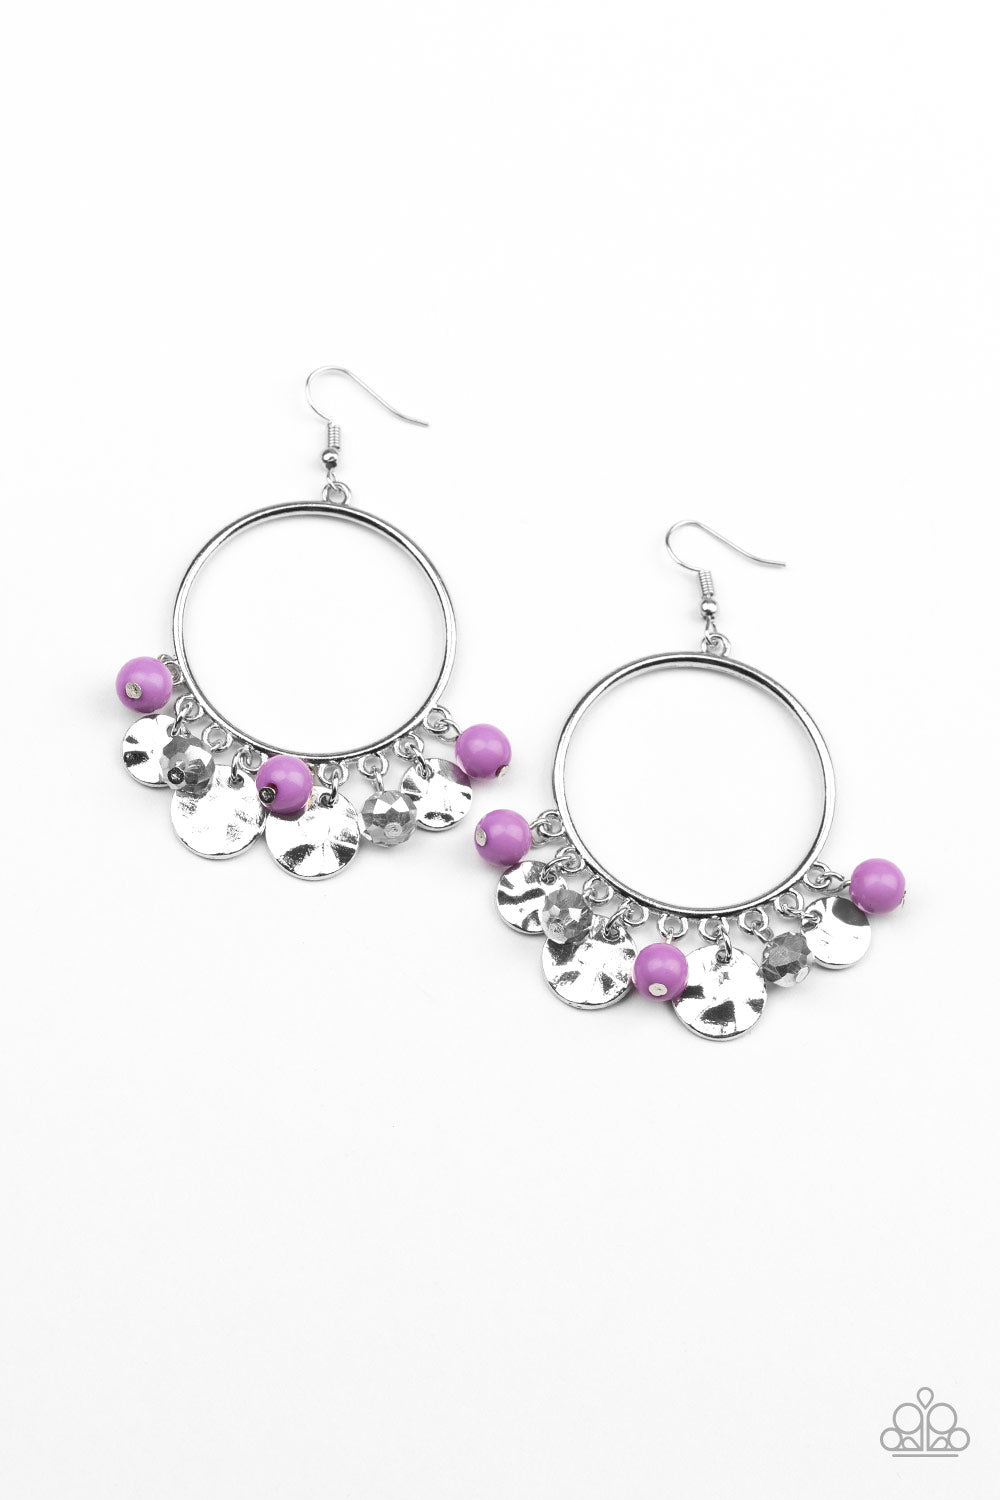 Chroma Chimes - Purple Earrings - Paparazzi Accessories - Jazzy Jewels With Lady J